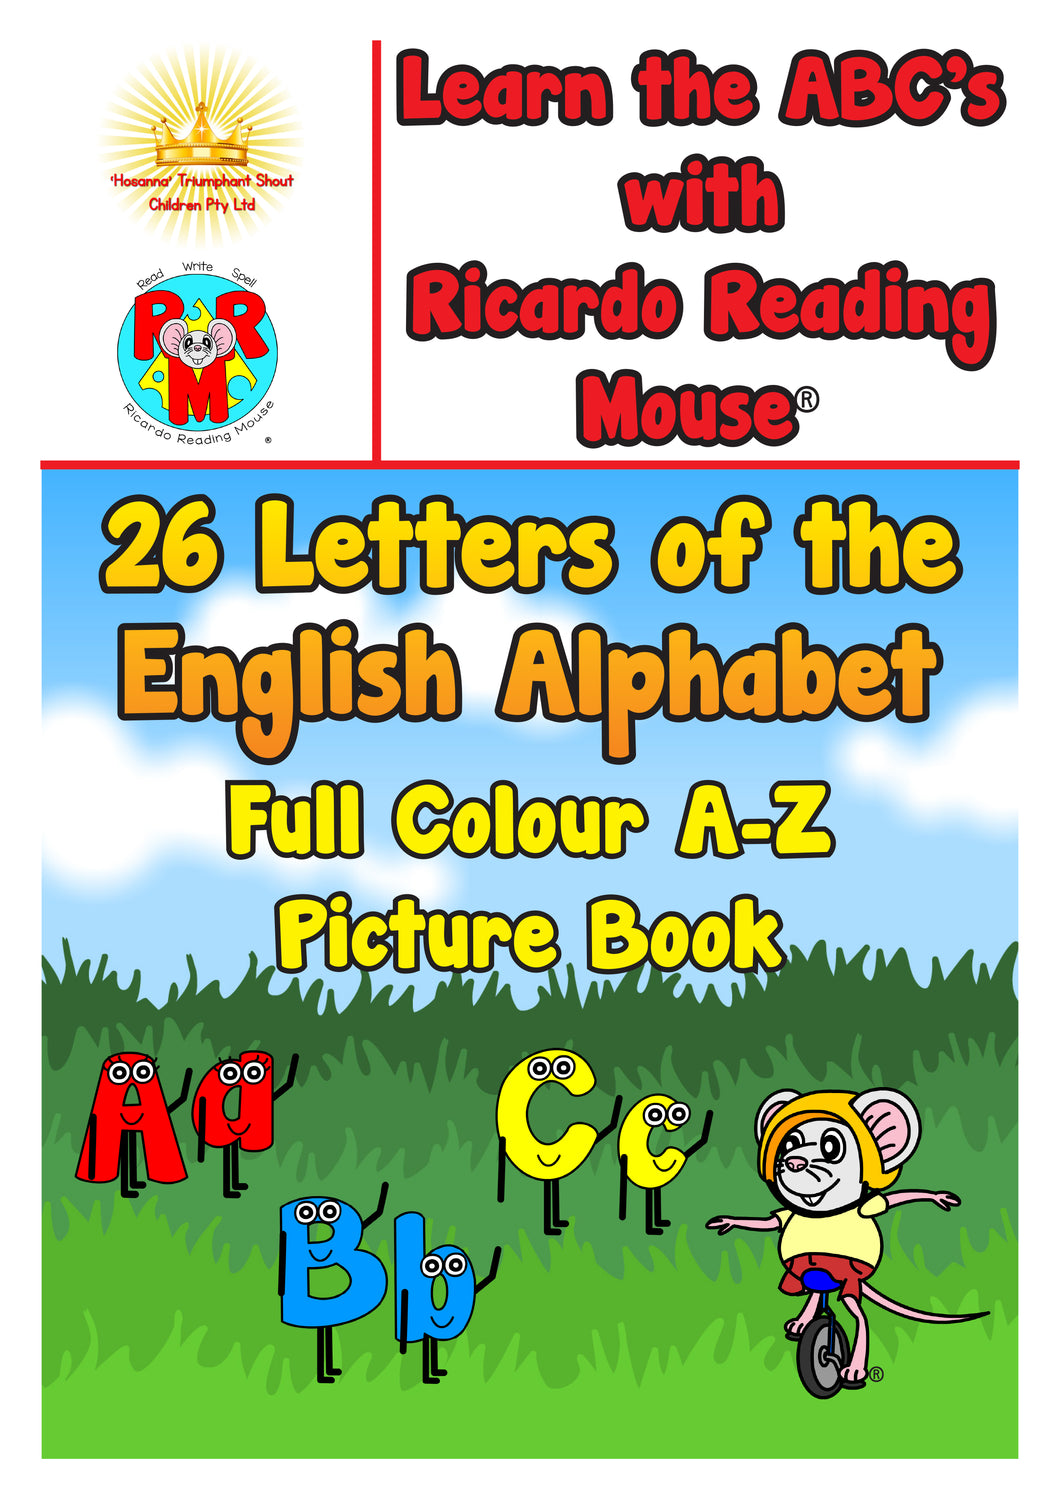 Learn the ABC’s with Ricardo Reading Mouse